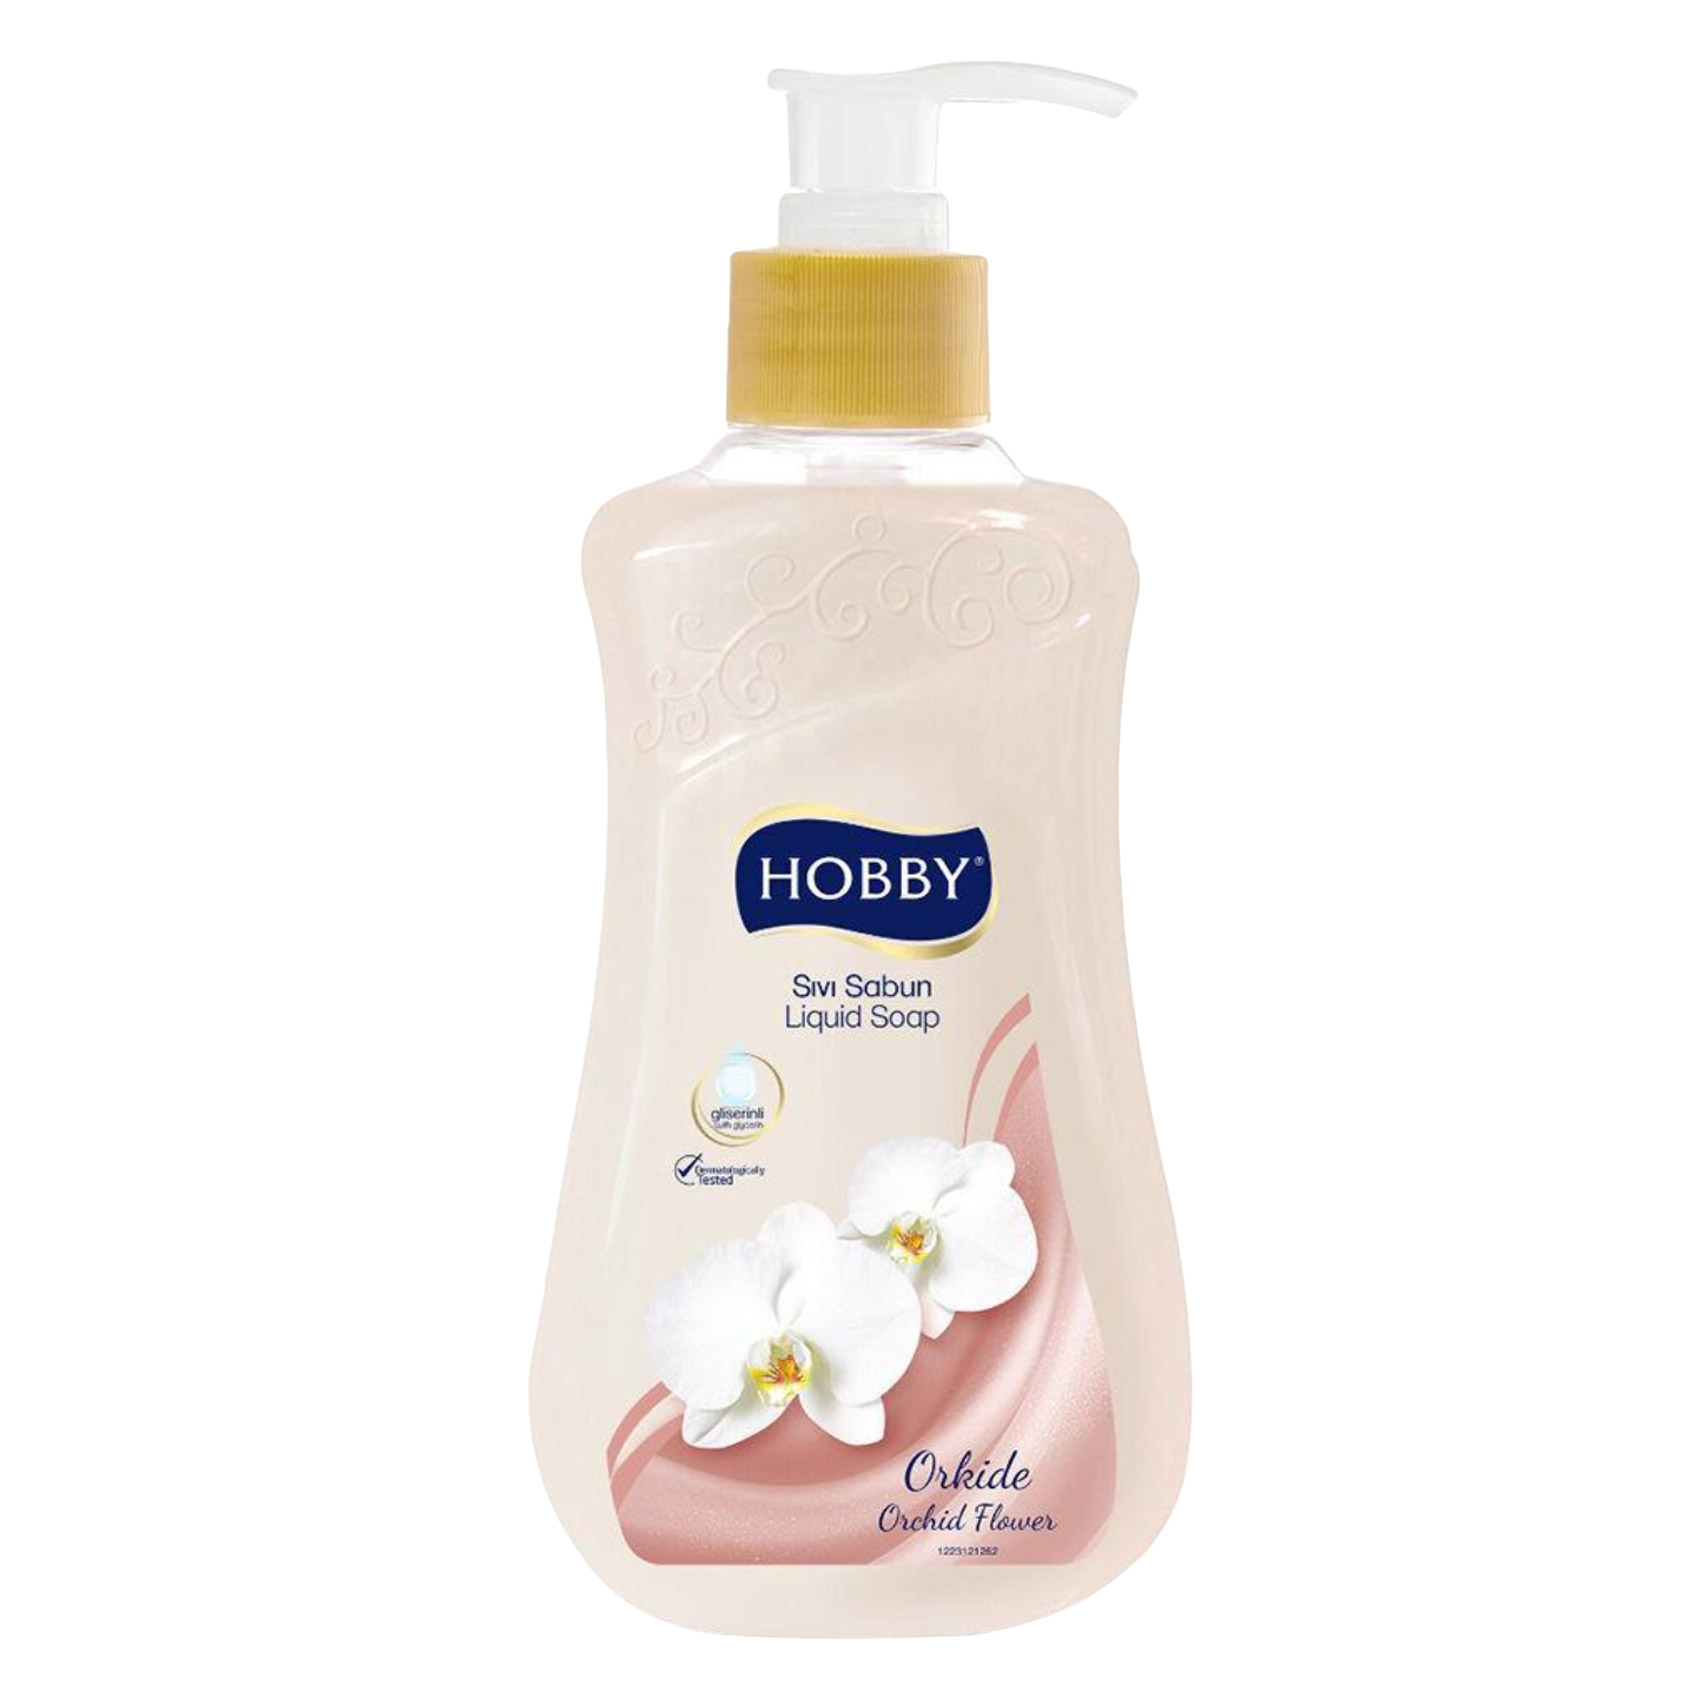 Hobby Orchid Flo. Serenity H/W400Ml